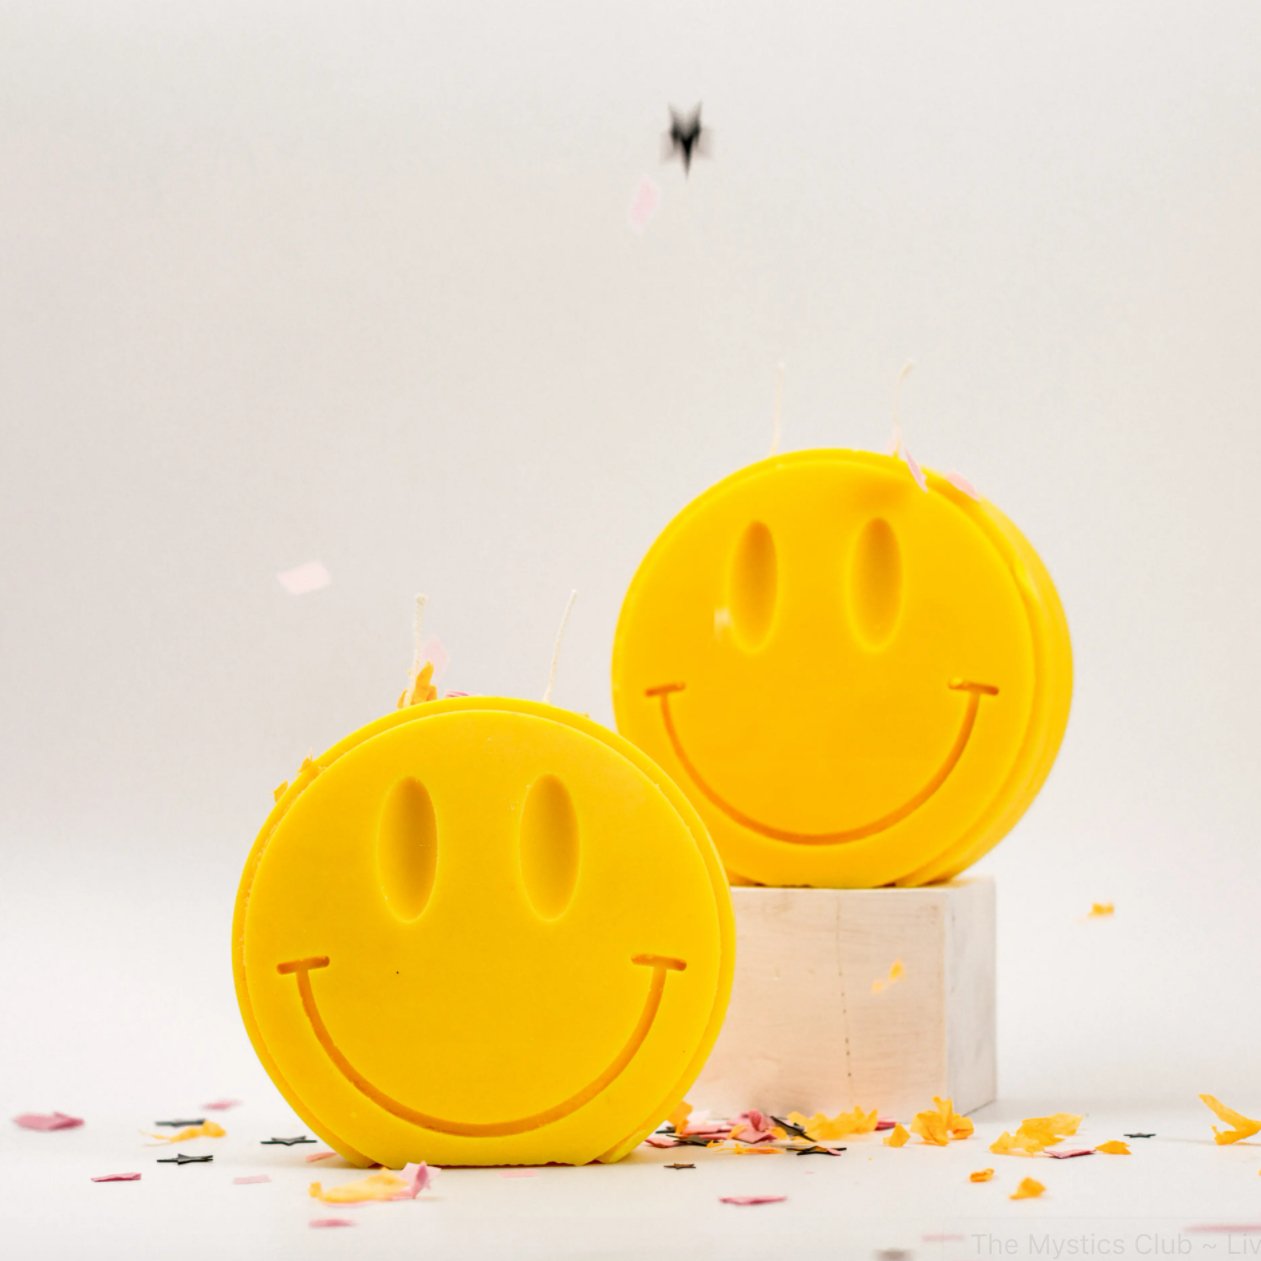 Smiley Face Candle - The Mystics Club